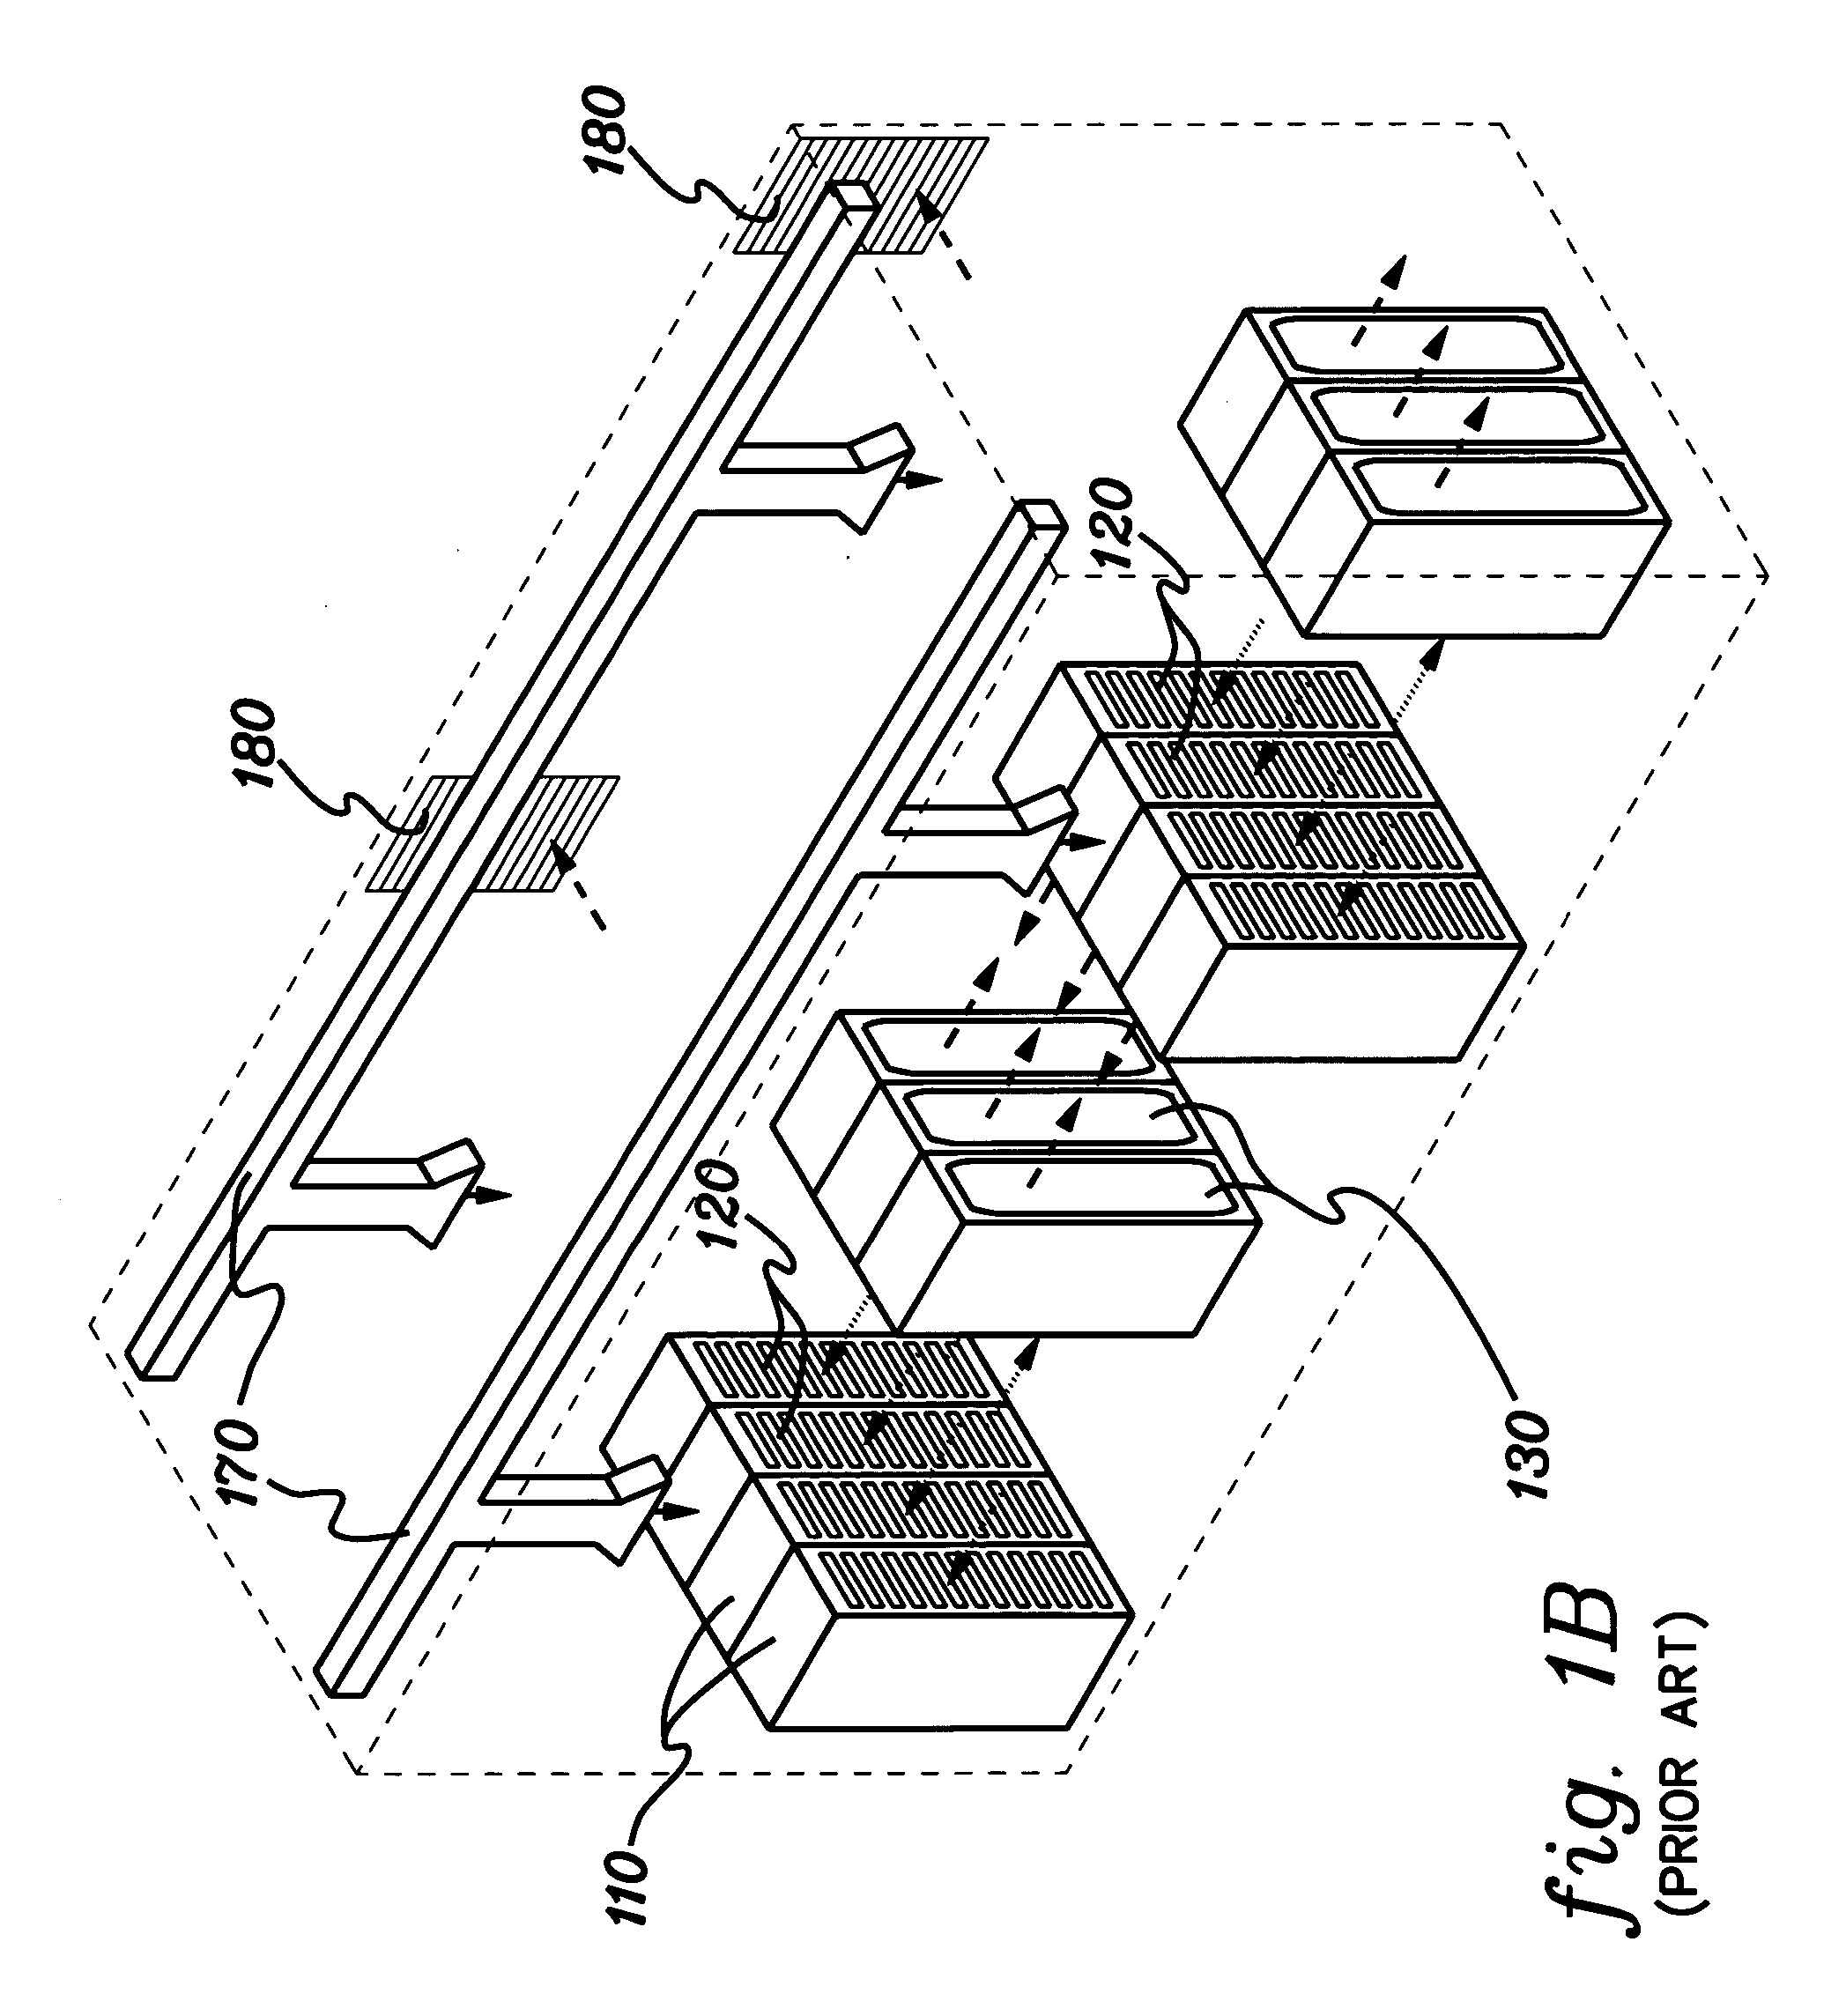 Apparatus and method for facilitating cooling of an electronics rack by mixing cooler air flow with re-circulating air flow in a re-circulation region